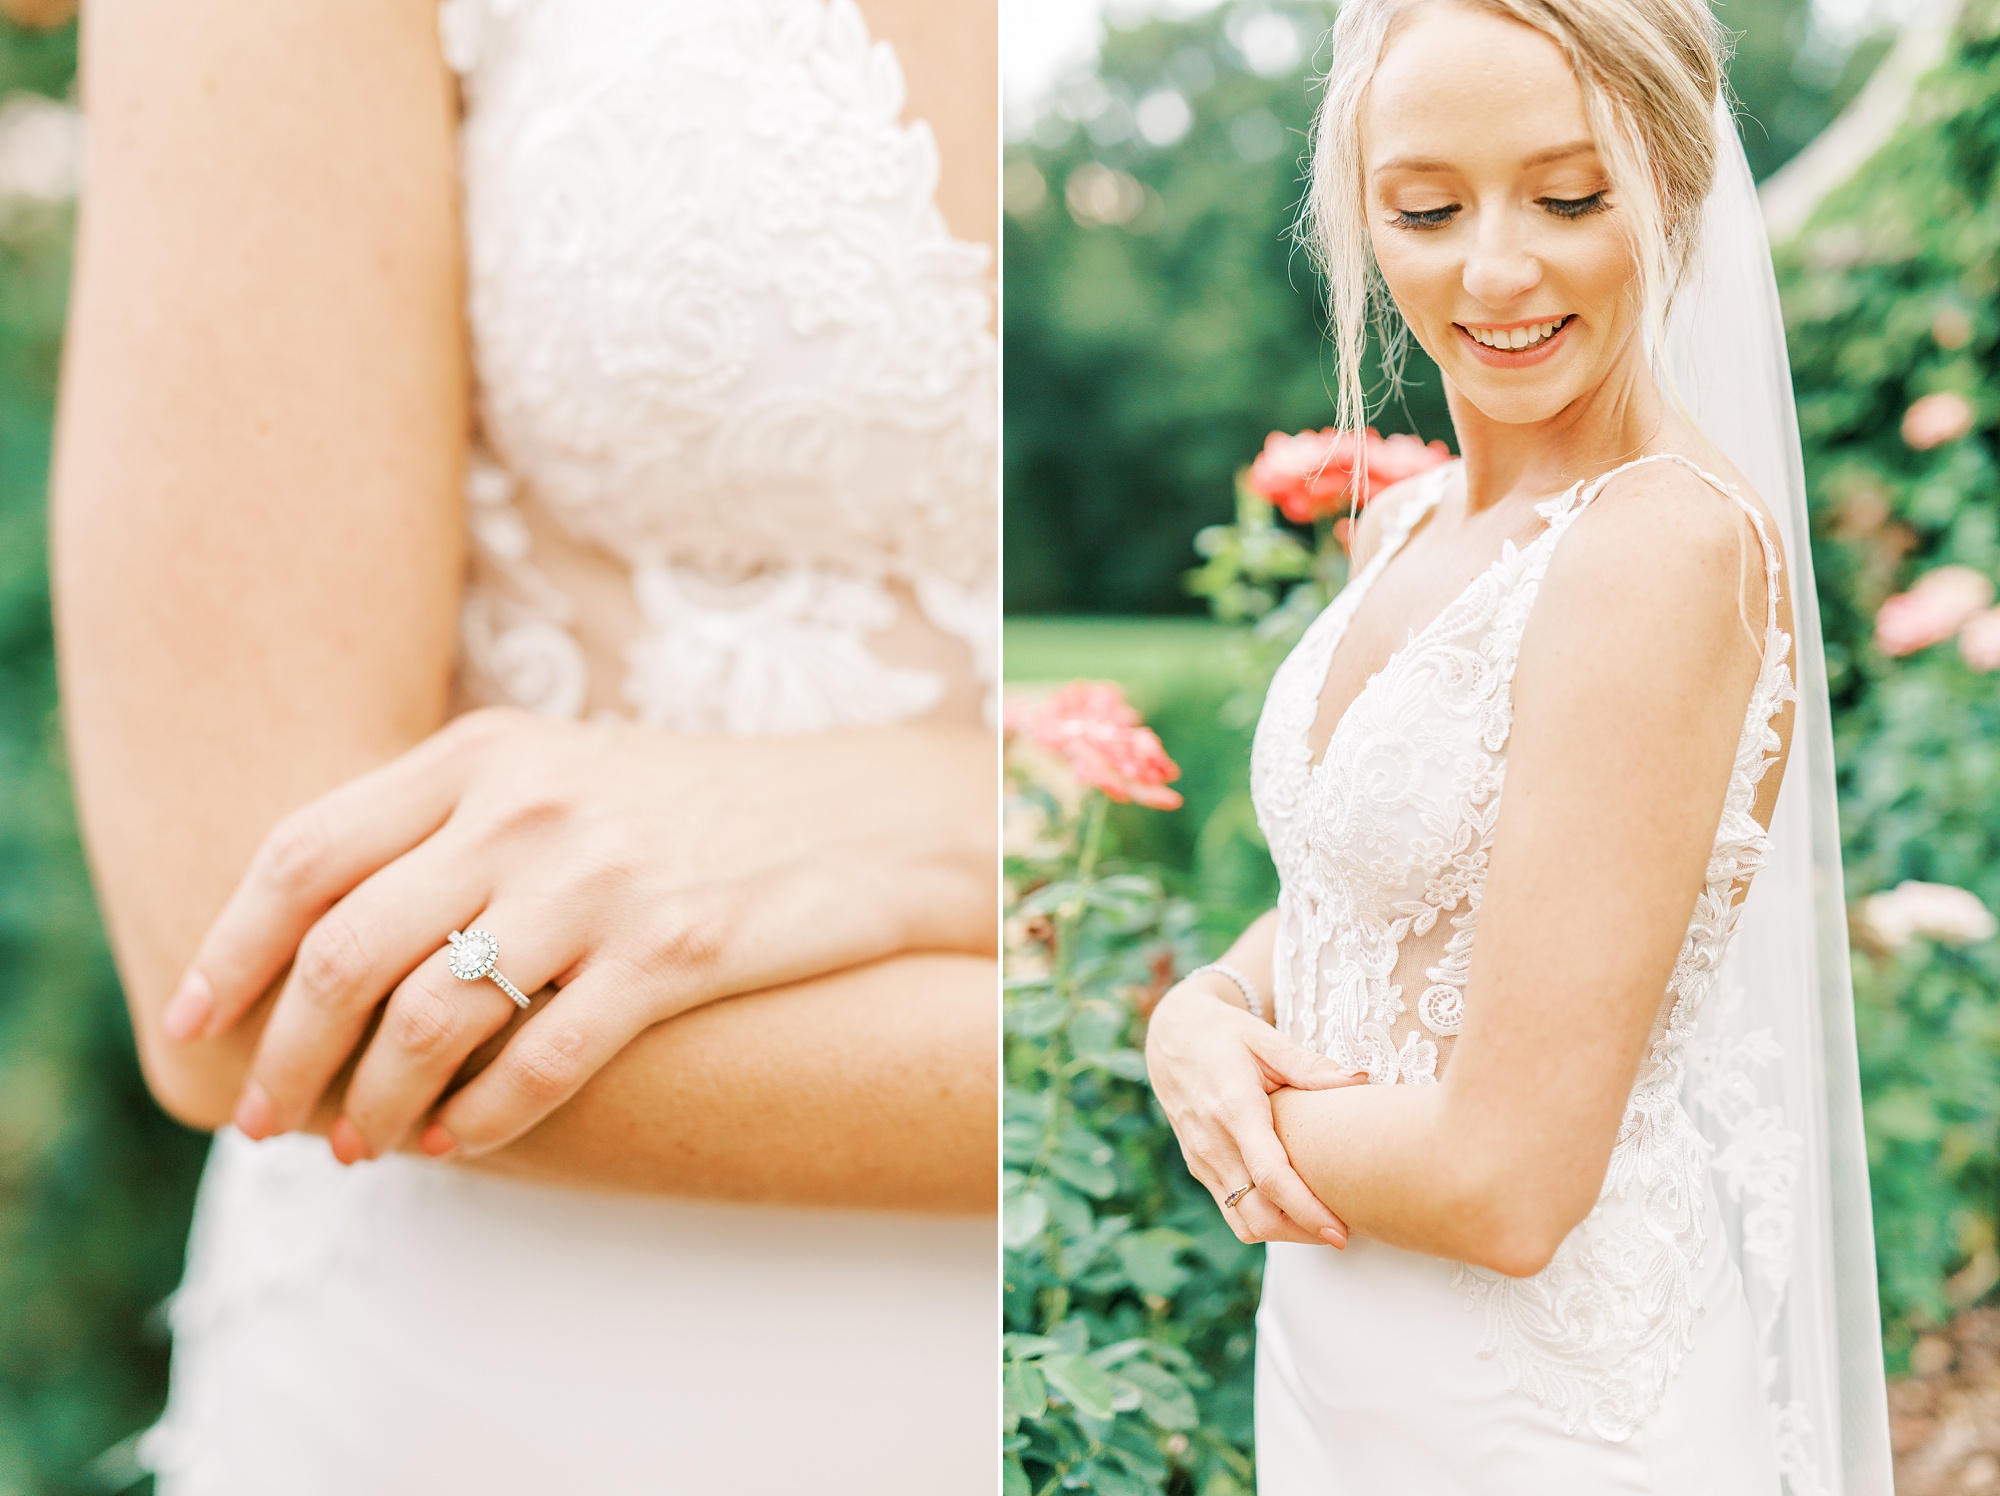 modern wedding dress with lace details